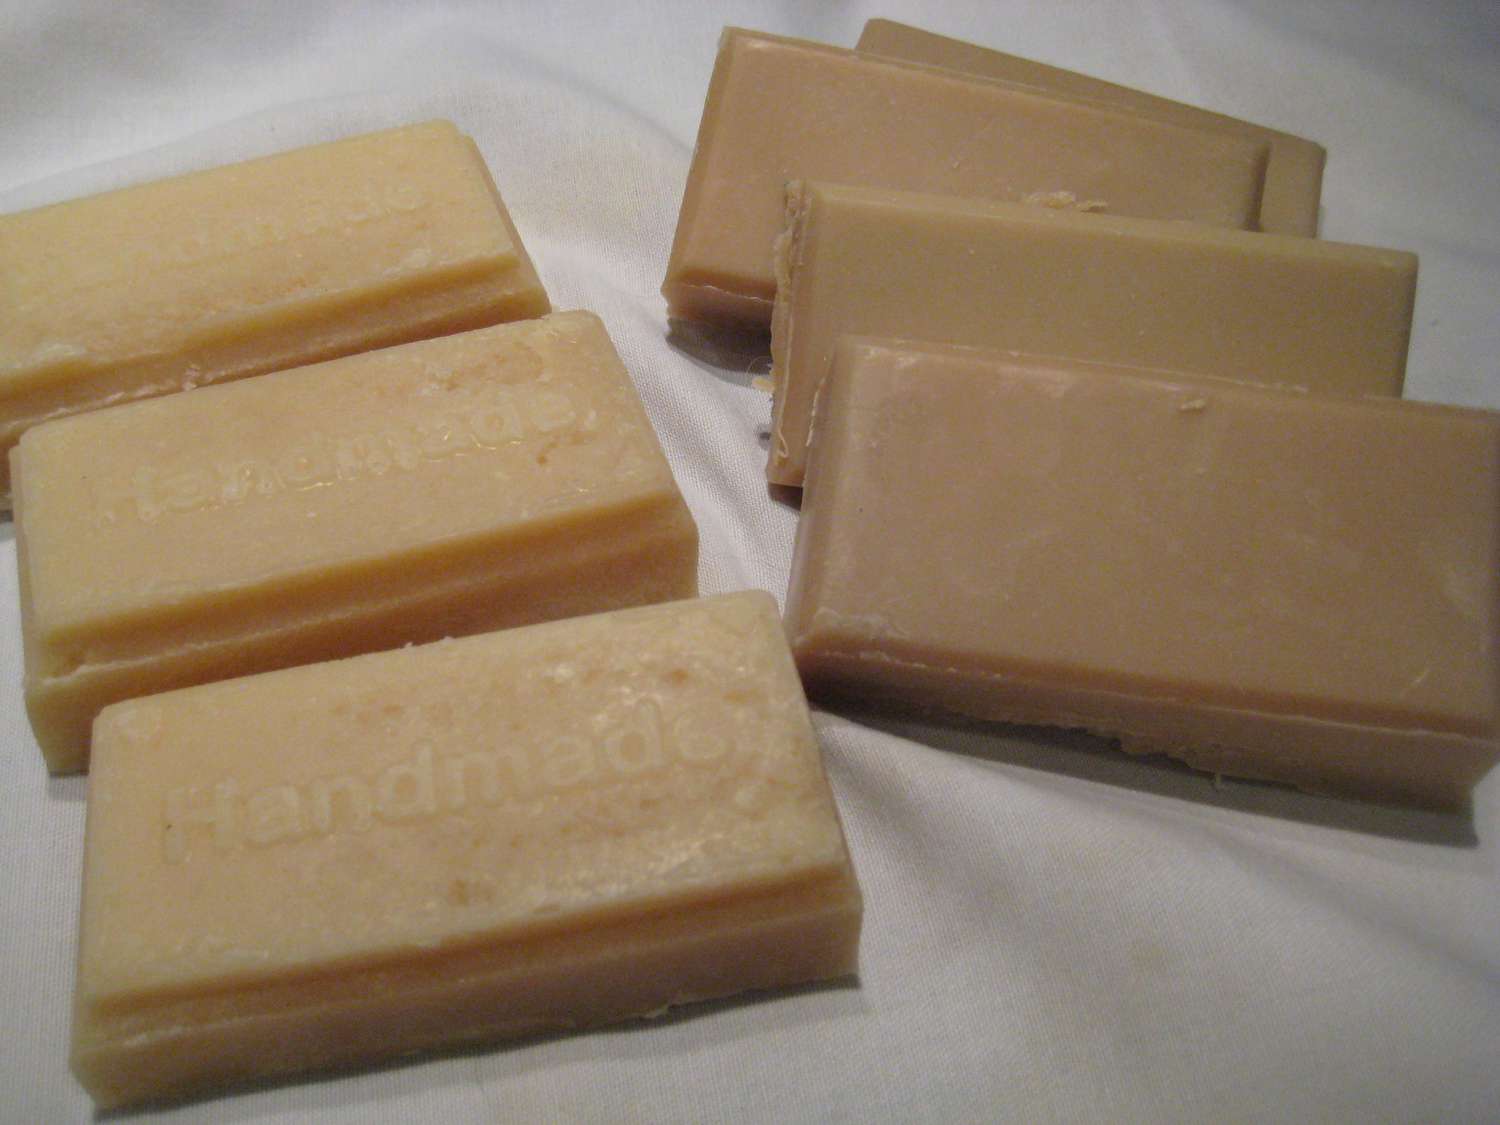 Finished soaps made with heavy cream